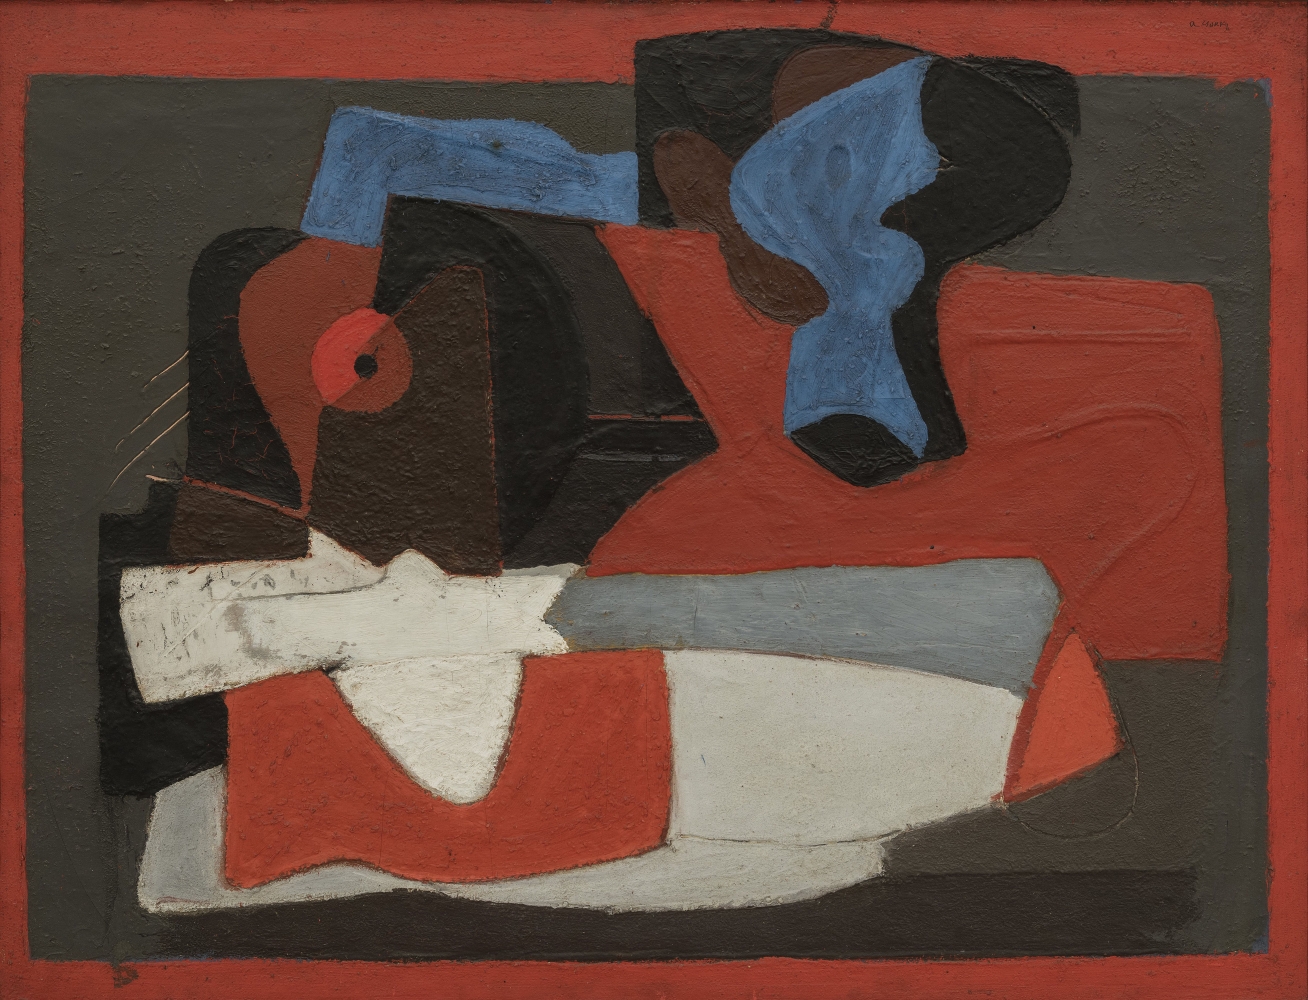 Composition of Forms on Table, 1928&ndash;29, oil on canvas, 33 x 43 in. (83.8 x 109.2 cm). Collection of the Honorable Joseph P. Carroll and Dr. Roberta Carroll. Photo: Joshua Nefsky. [AGCR: P074]